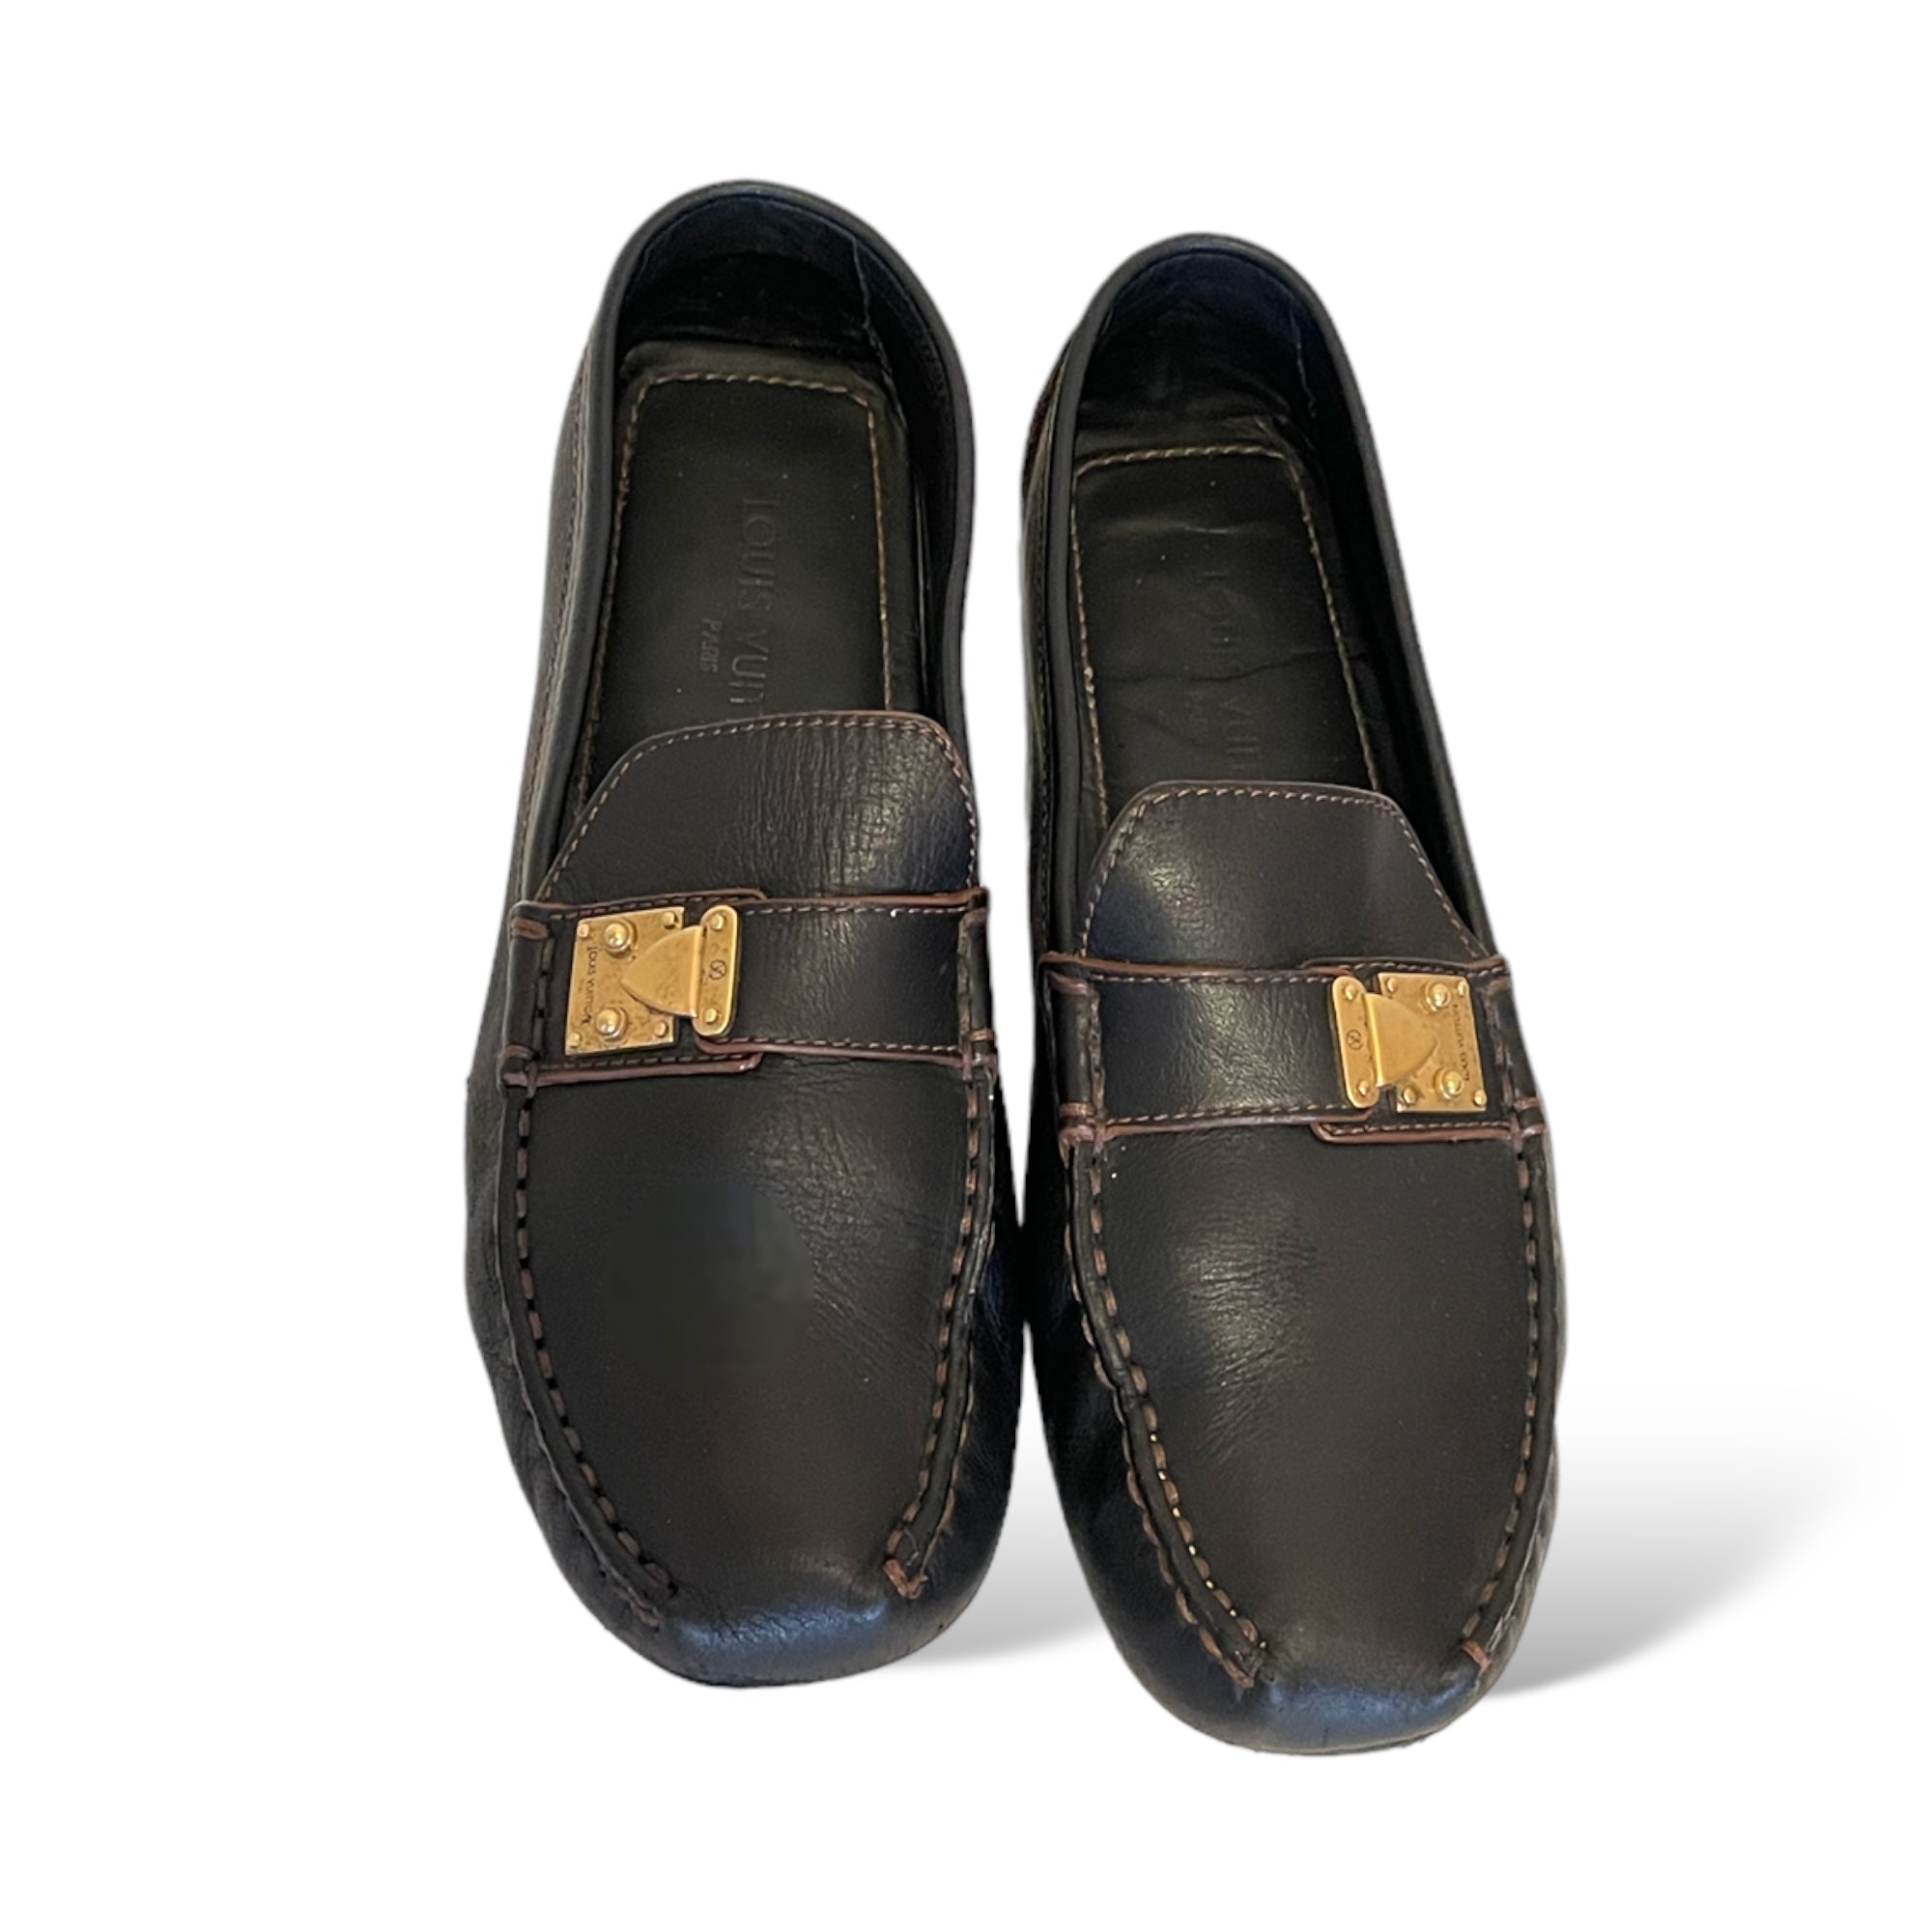 LOUIS VUITTON Vintage Suhali Leather Loafers, Size: 37.5